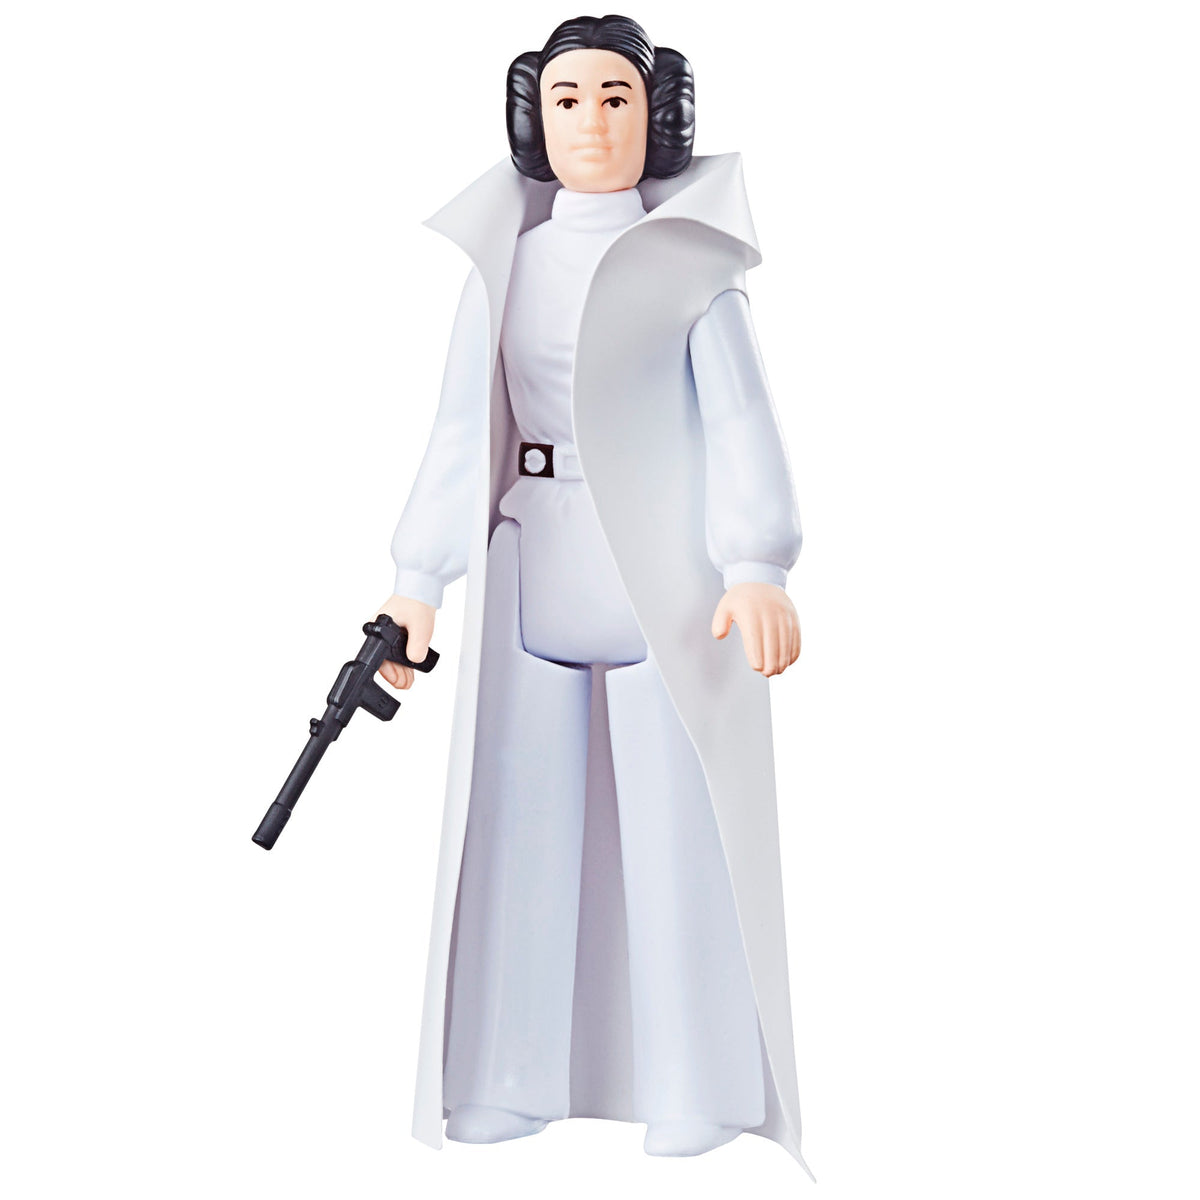 Star Wars Retro Collection Star Wars: A New Hope Collectible Figures  Multipack